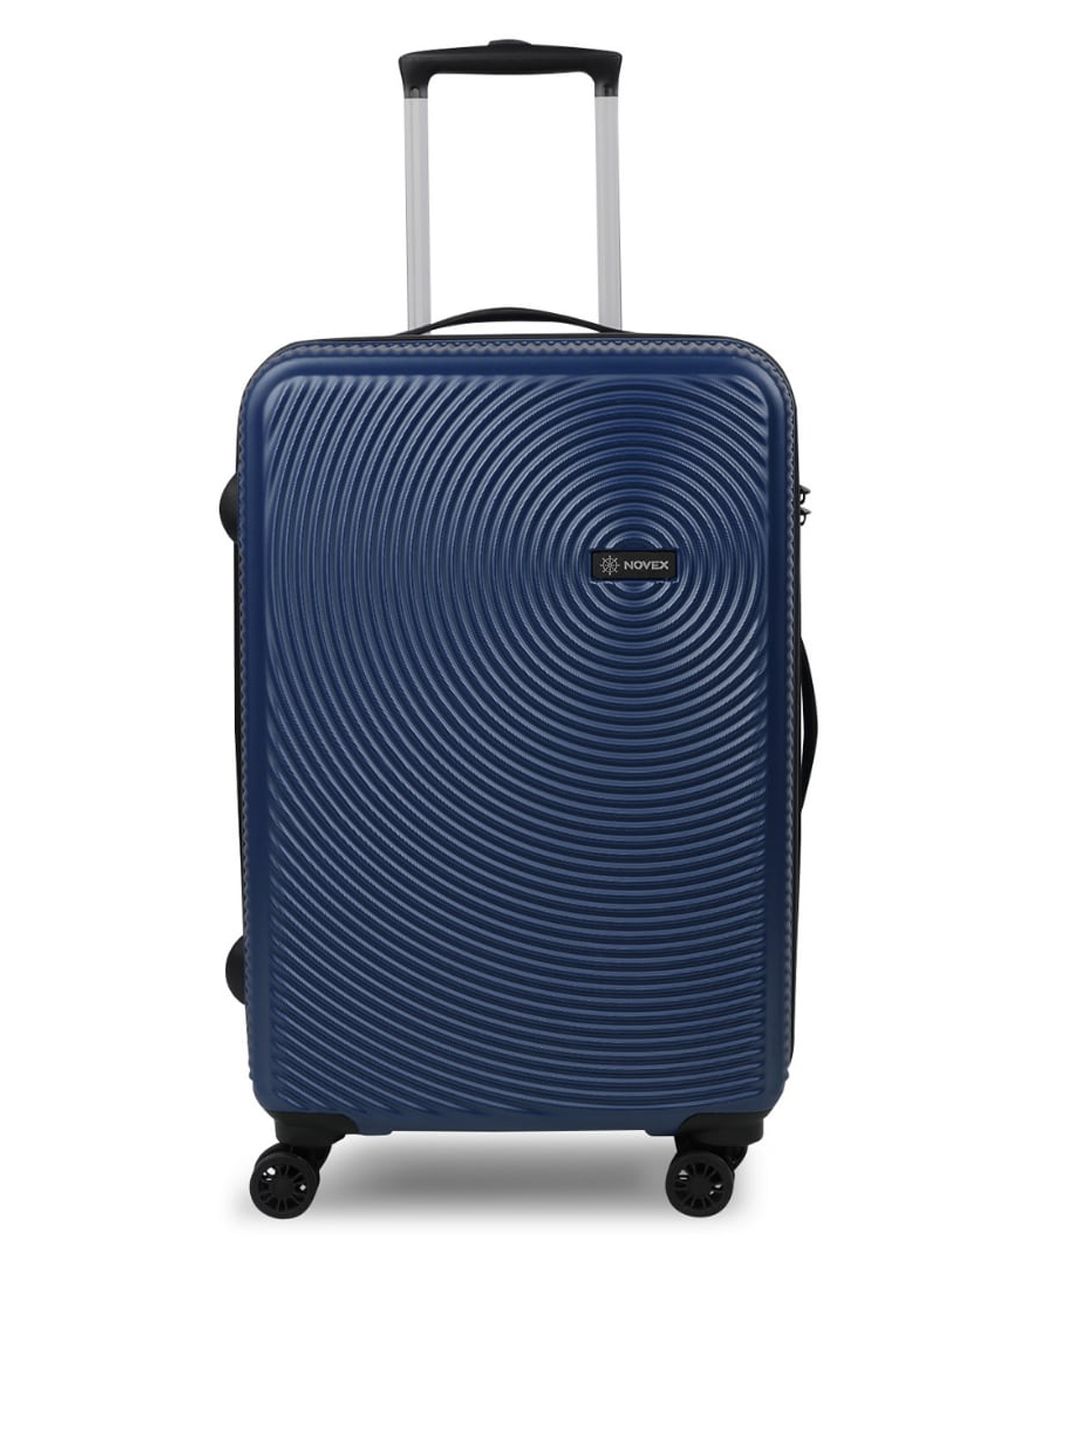 NOVEX Unisex Blue Textured Hard-Sided Cabin Suitcase Trolley Bag Price in India